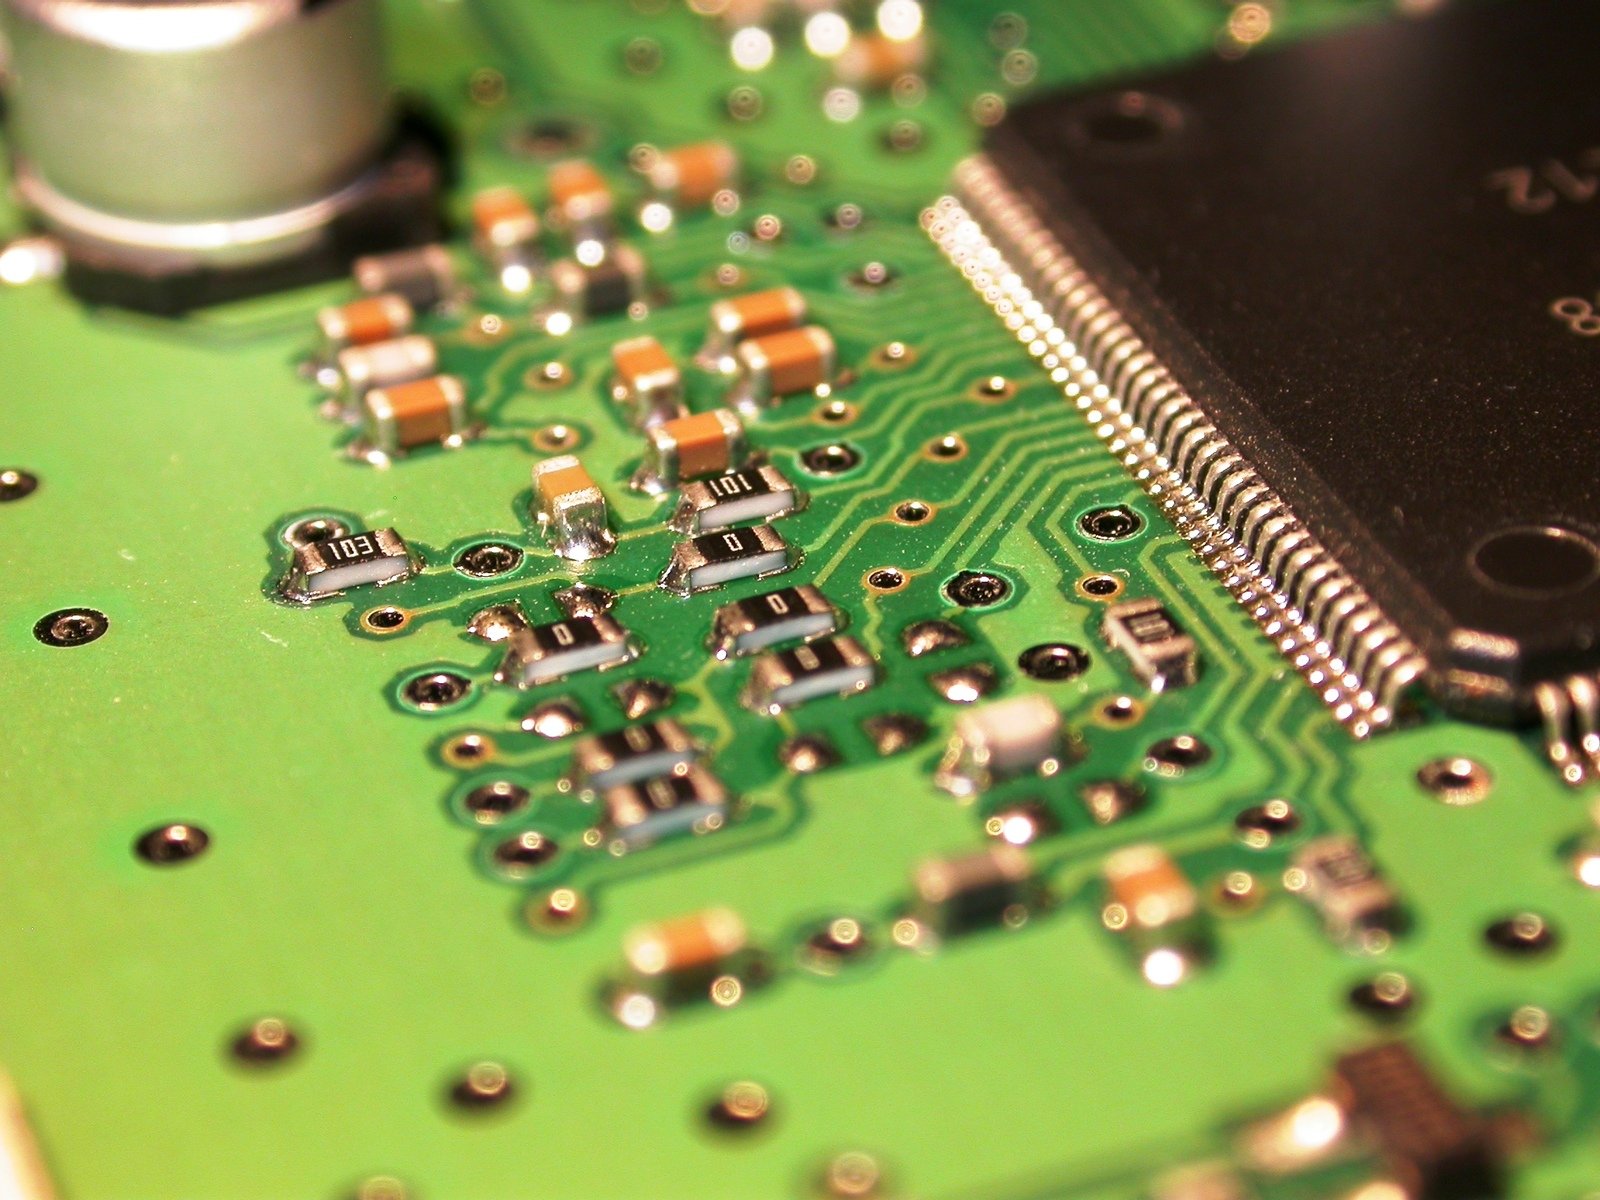 closeup view of electronic parts on a computer board